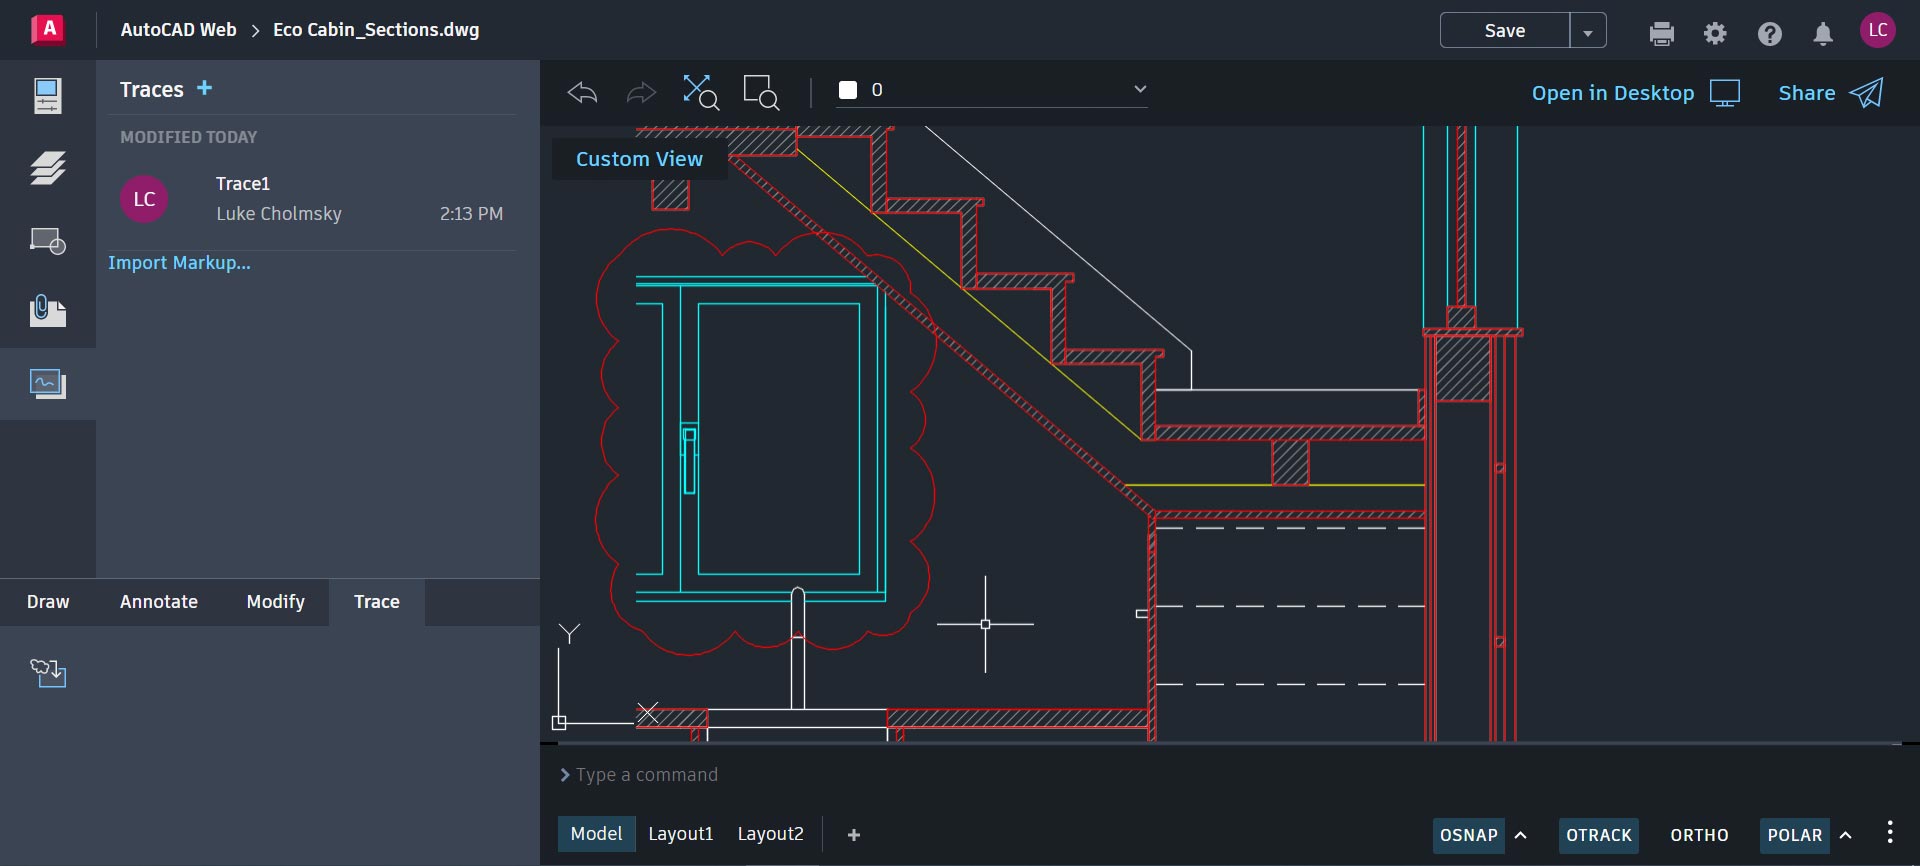 Band-Funktion in AutoCAD Web